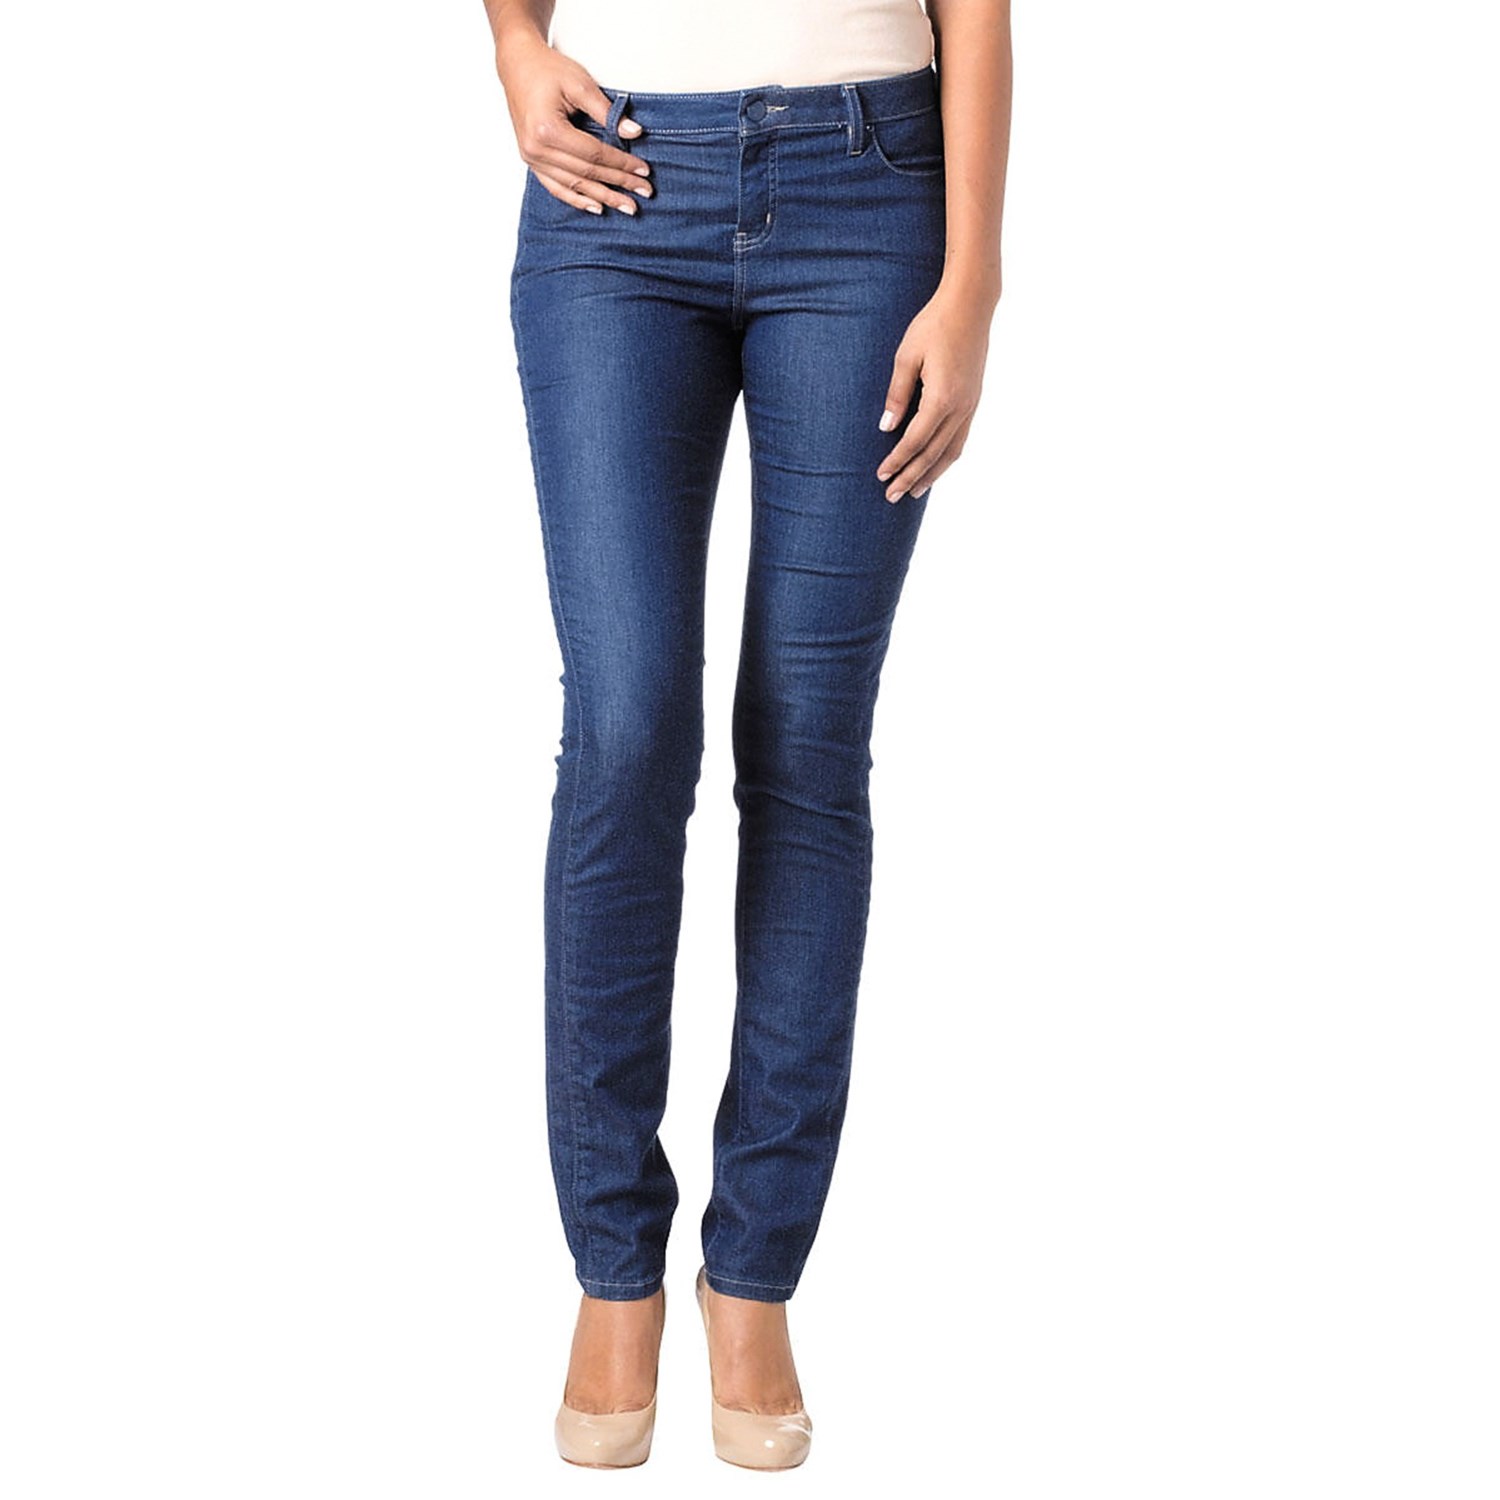 Christopher Blue Rose Skinny Jeans - Stretch Cotton (For Women) - Save 61%